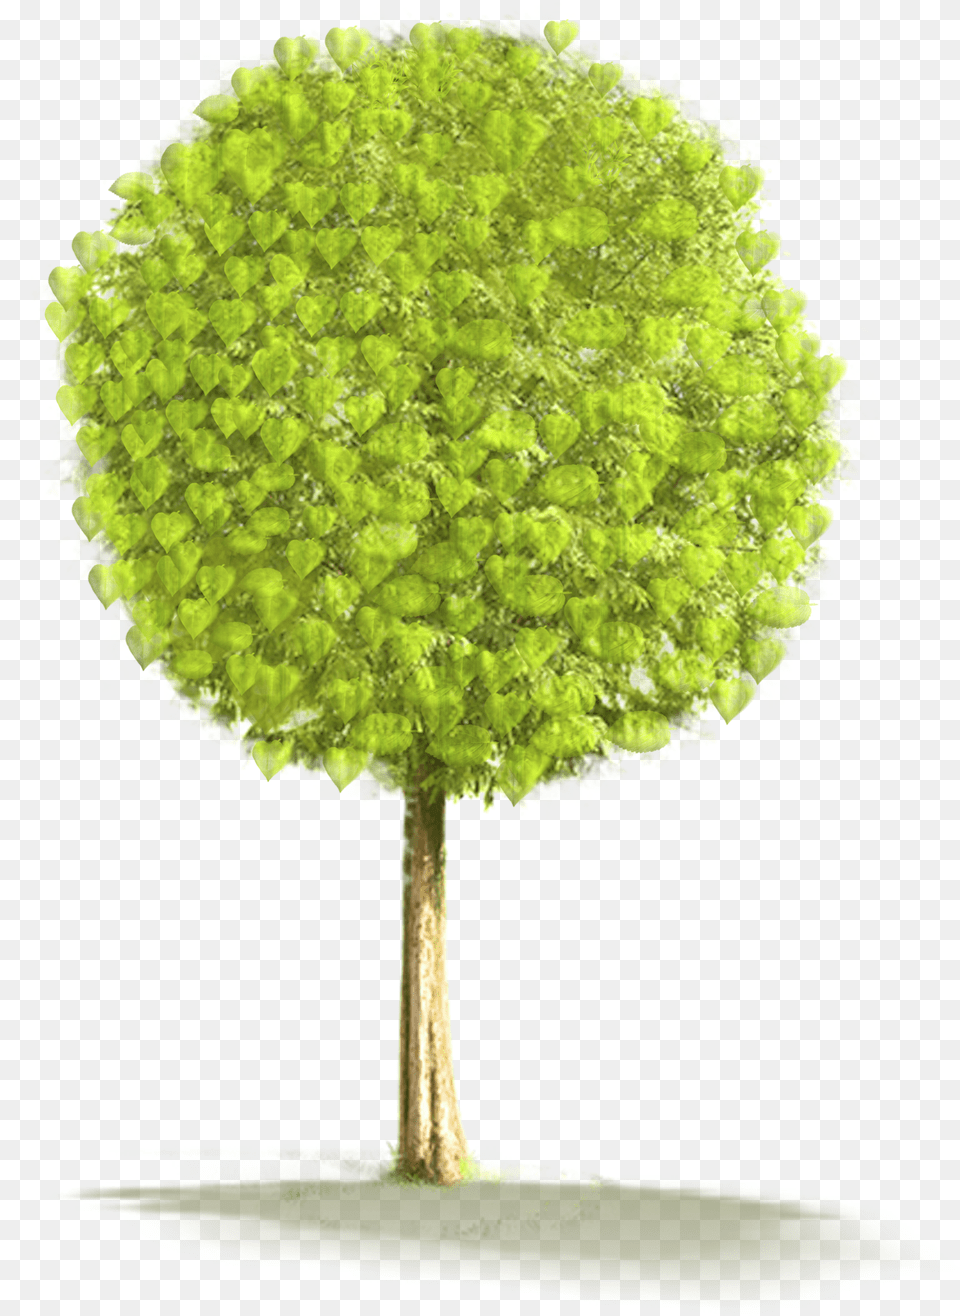 Download Animated Small Tree, Oak, Plant, Sycamore, Maple Png